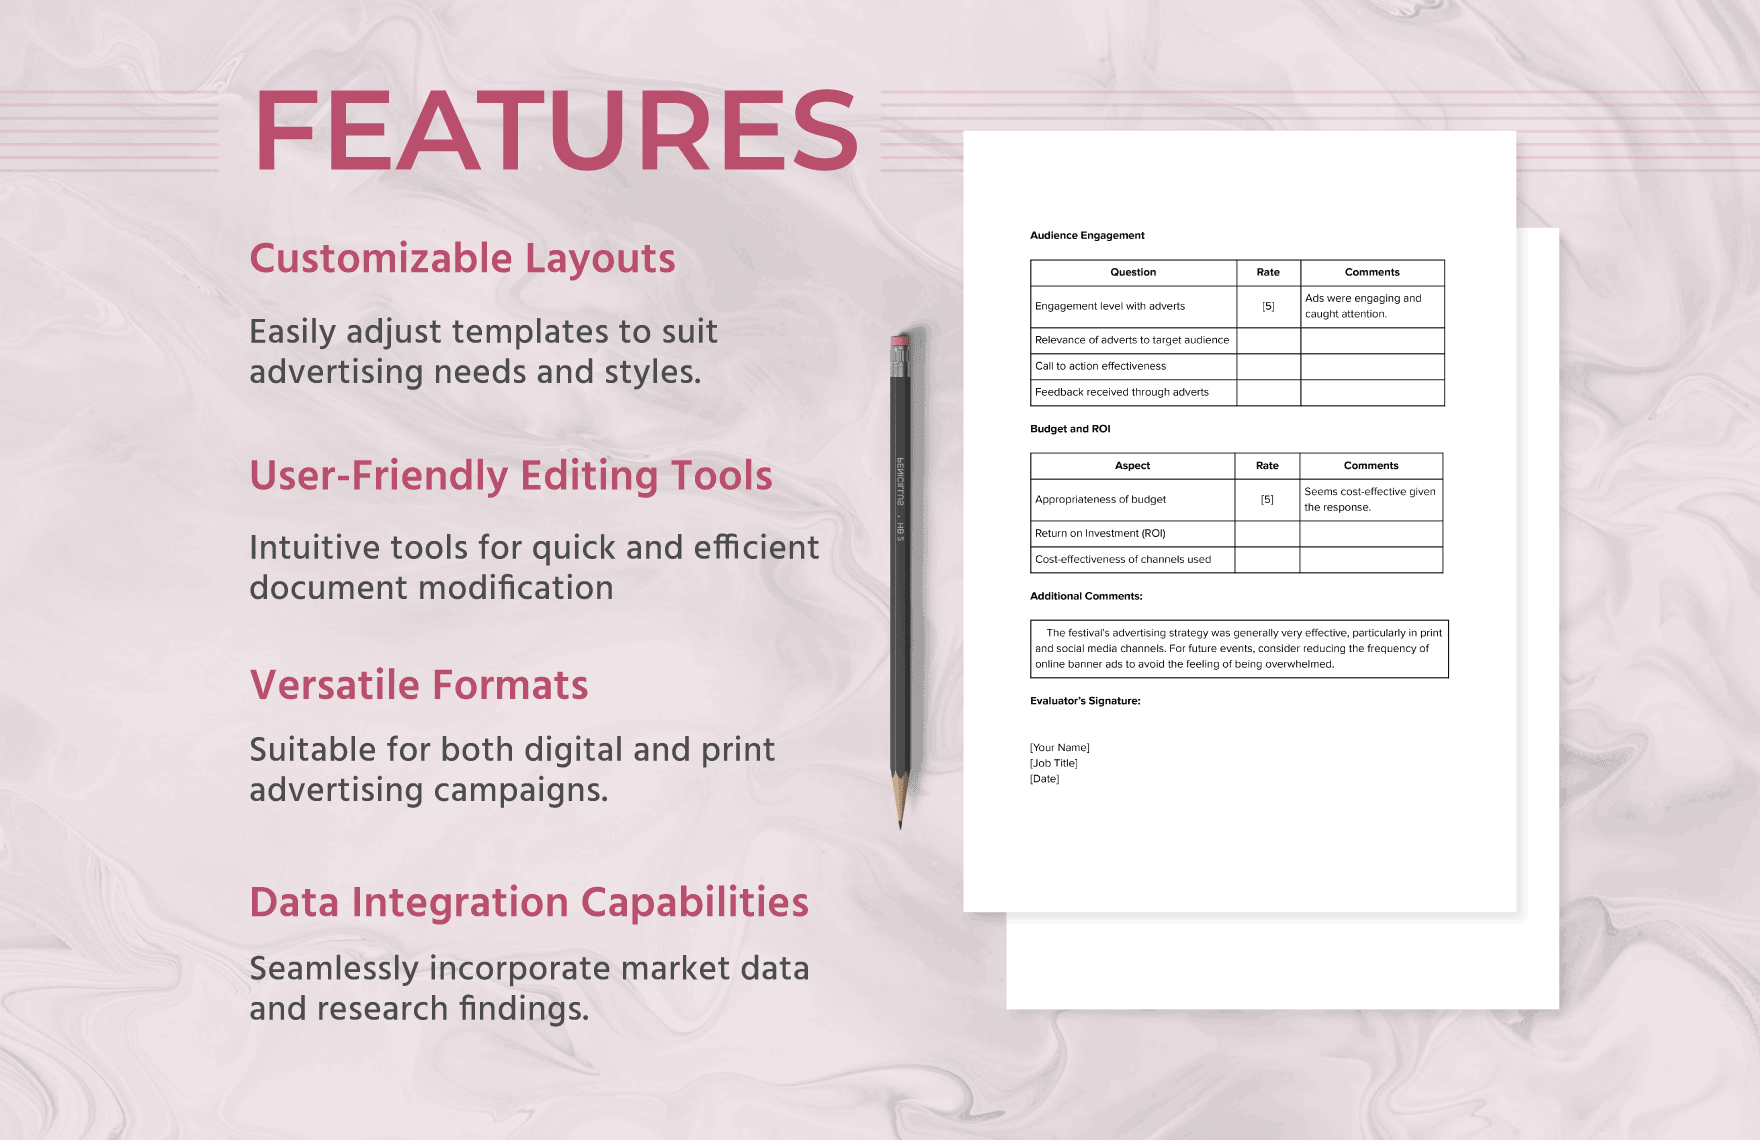 Event Evaluation Advertising Form Template